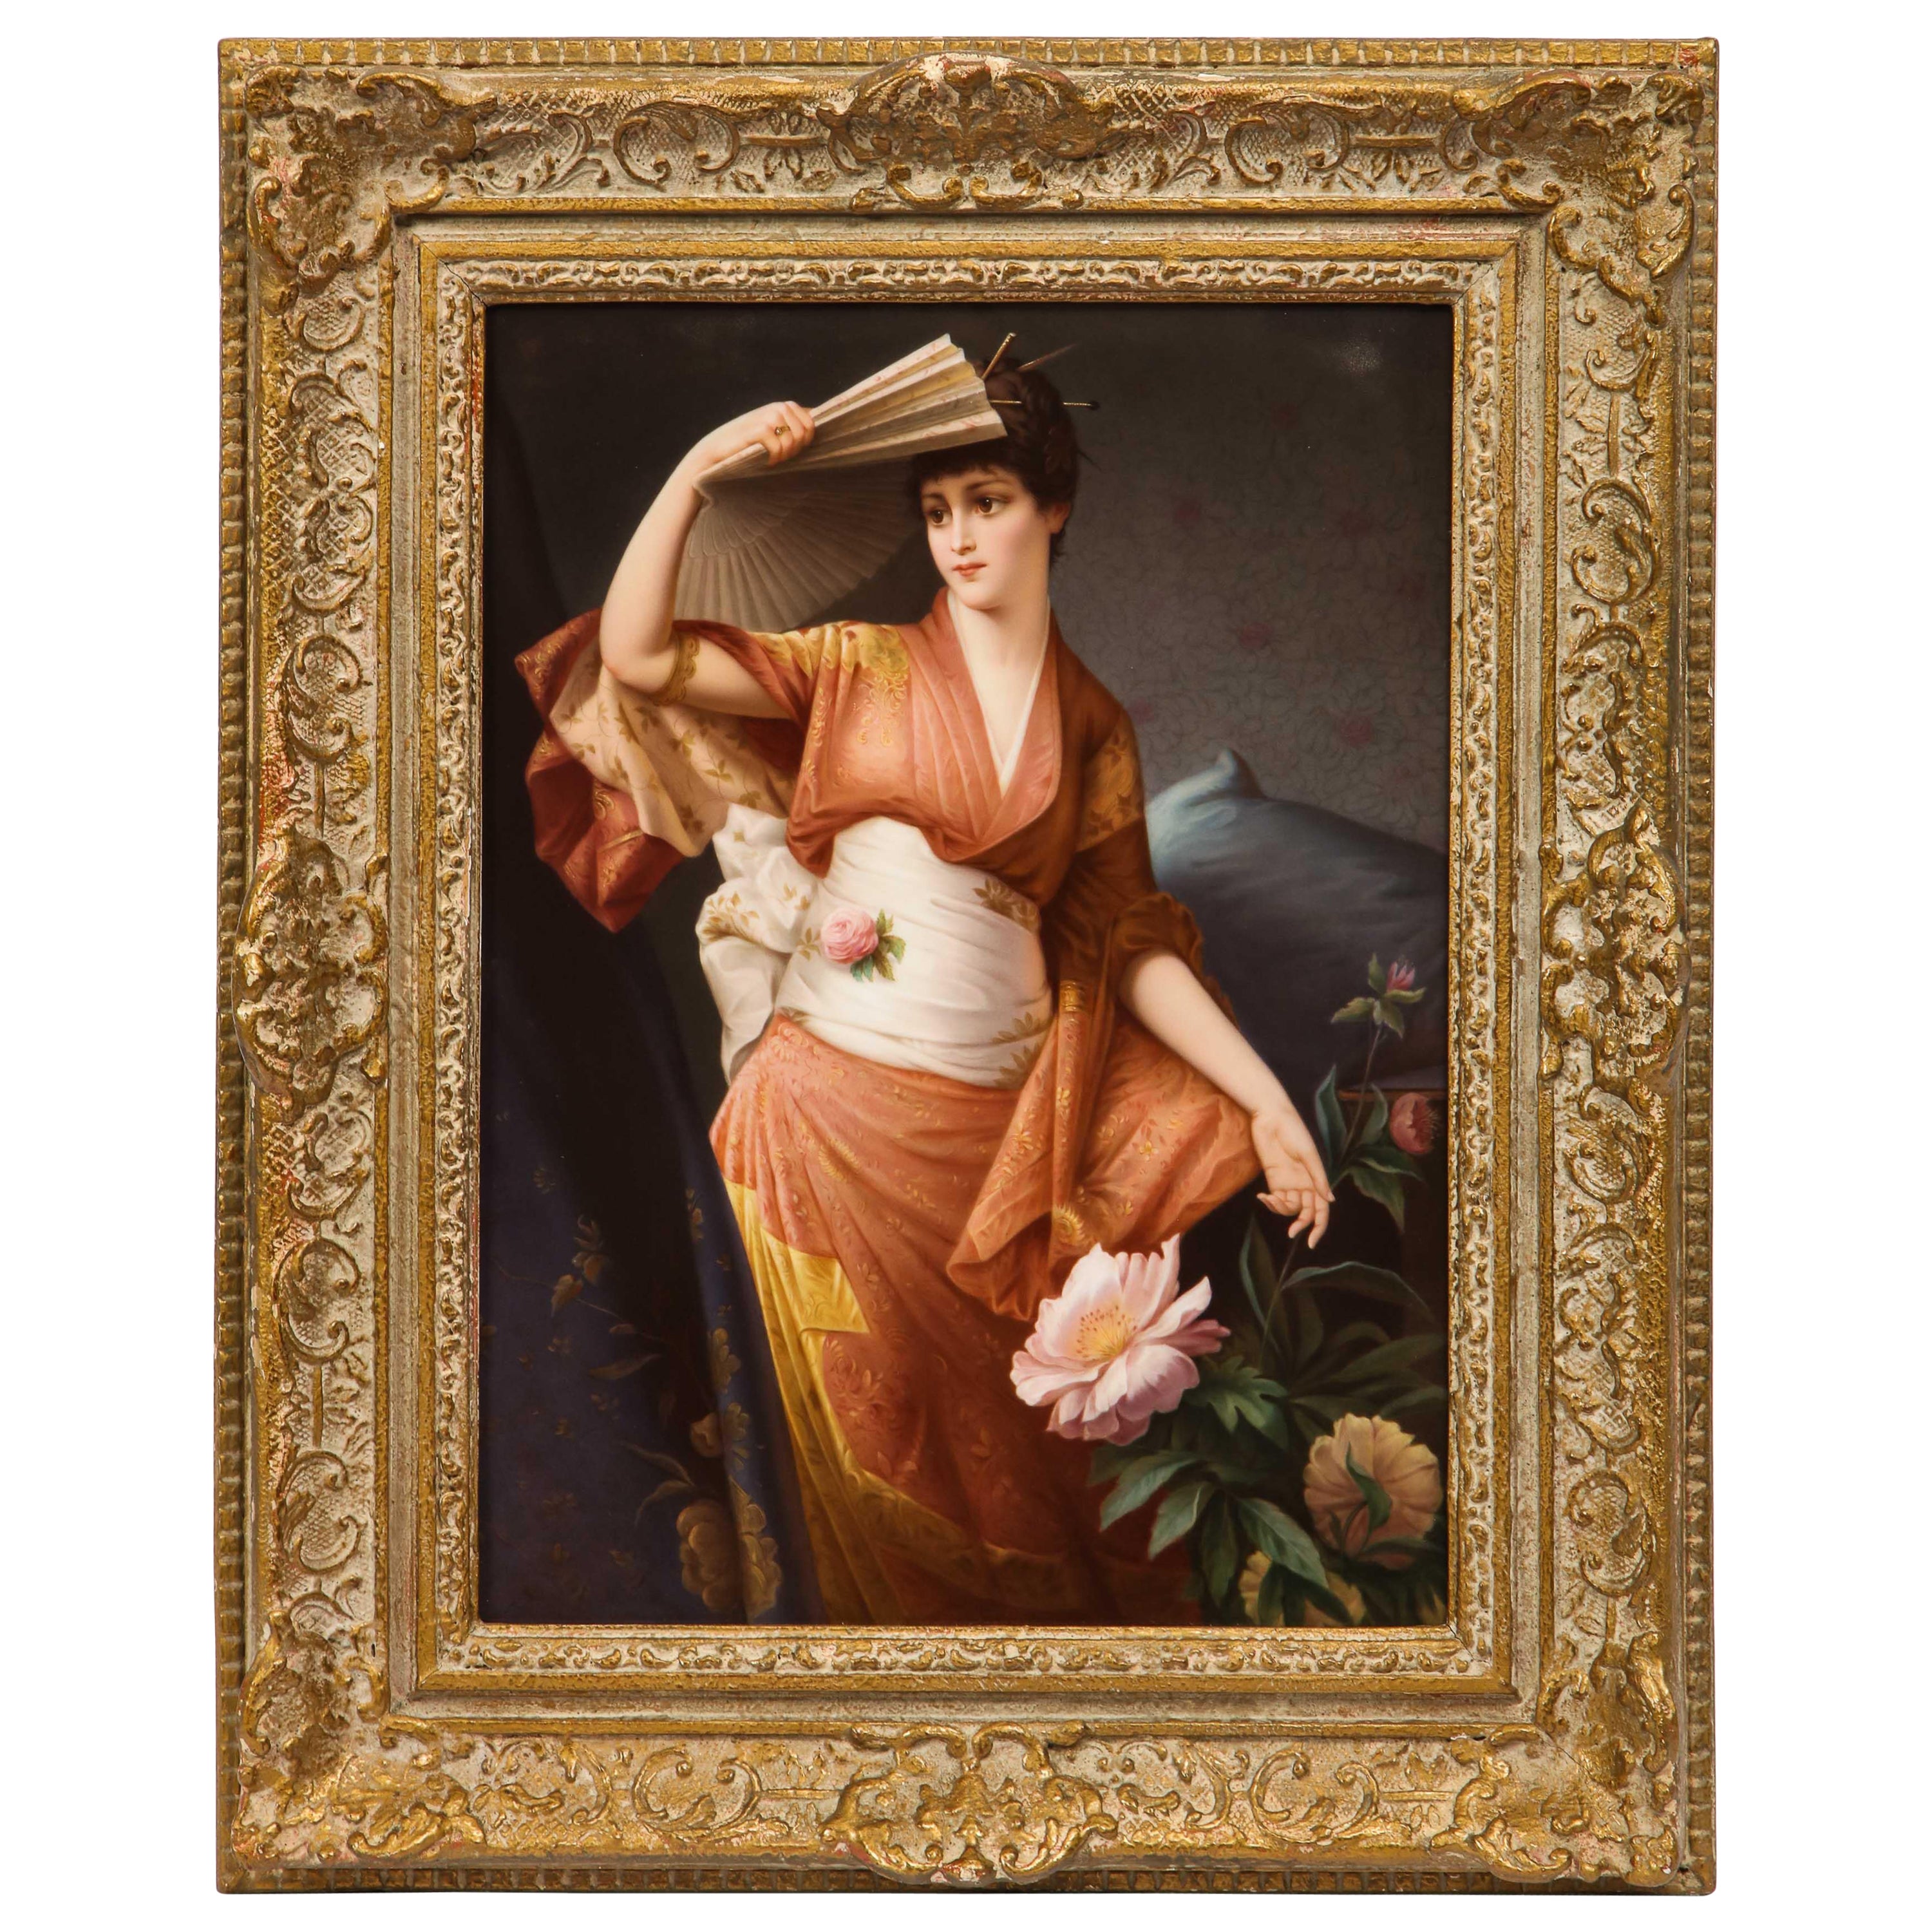 A KPM Hand-Painted Porcelain Plaque of a Japonism Beauty, Signed Wagner